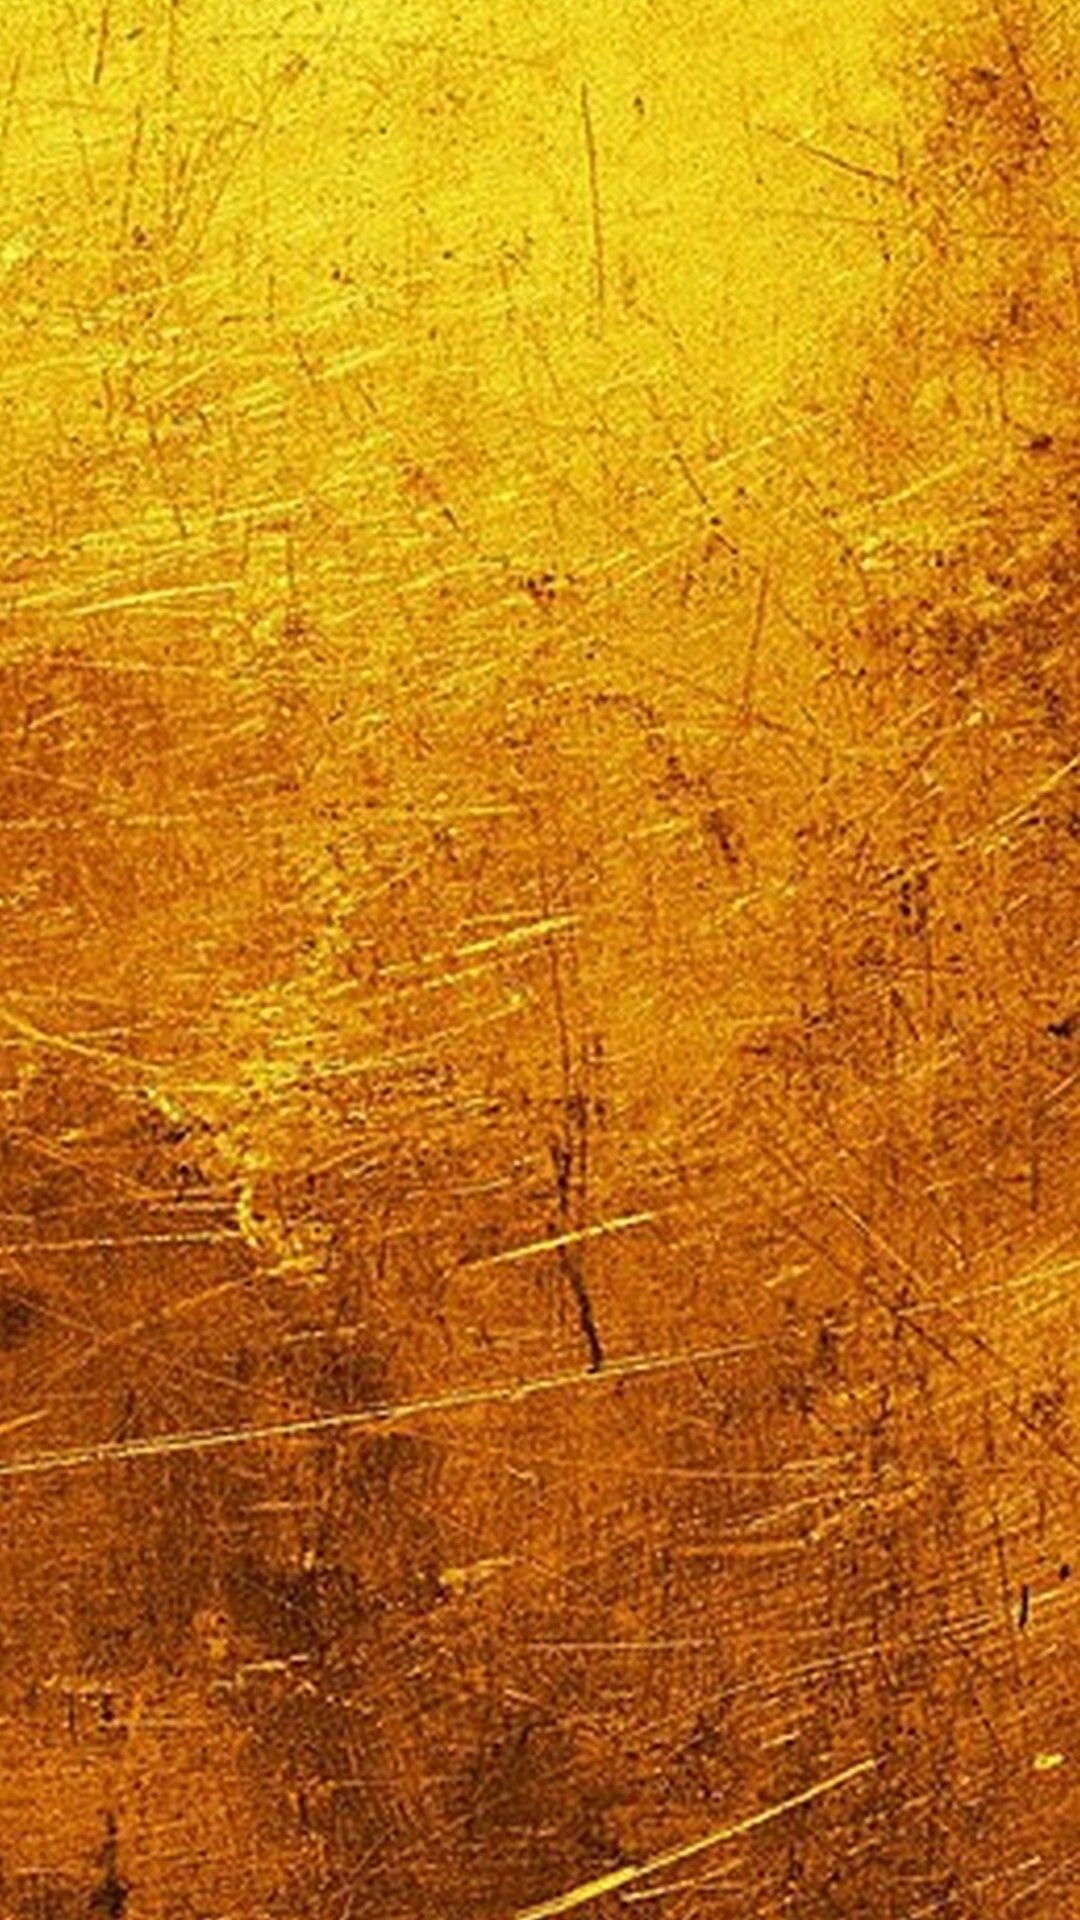 Gold Foil: The ancient gilt-bronze surface with lots of deformations. 1080x1920 Full HD Wallpaper.